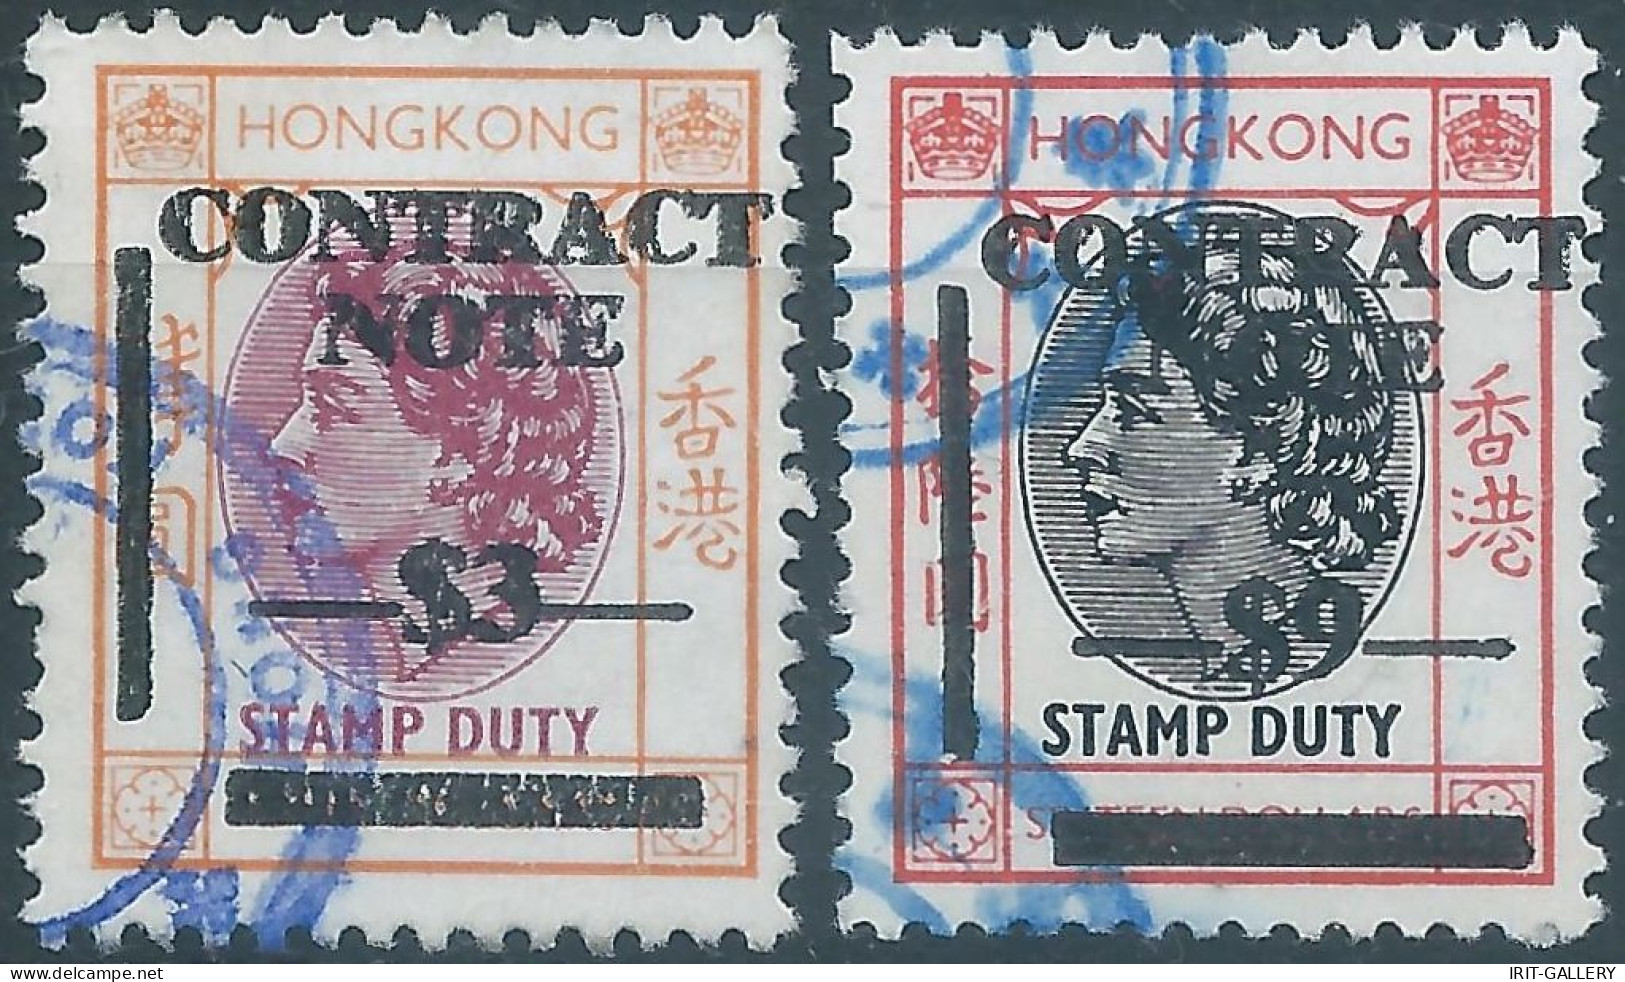 Great Britain-ENGLAND,HONG KONG Revenue Tax Fiscal  Stamp DUTY Contract Note, $3 & $9 , Obliterated - Francobollo Fiscali Postali